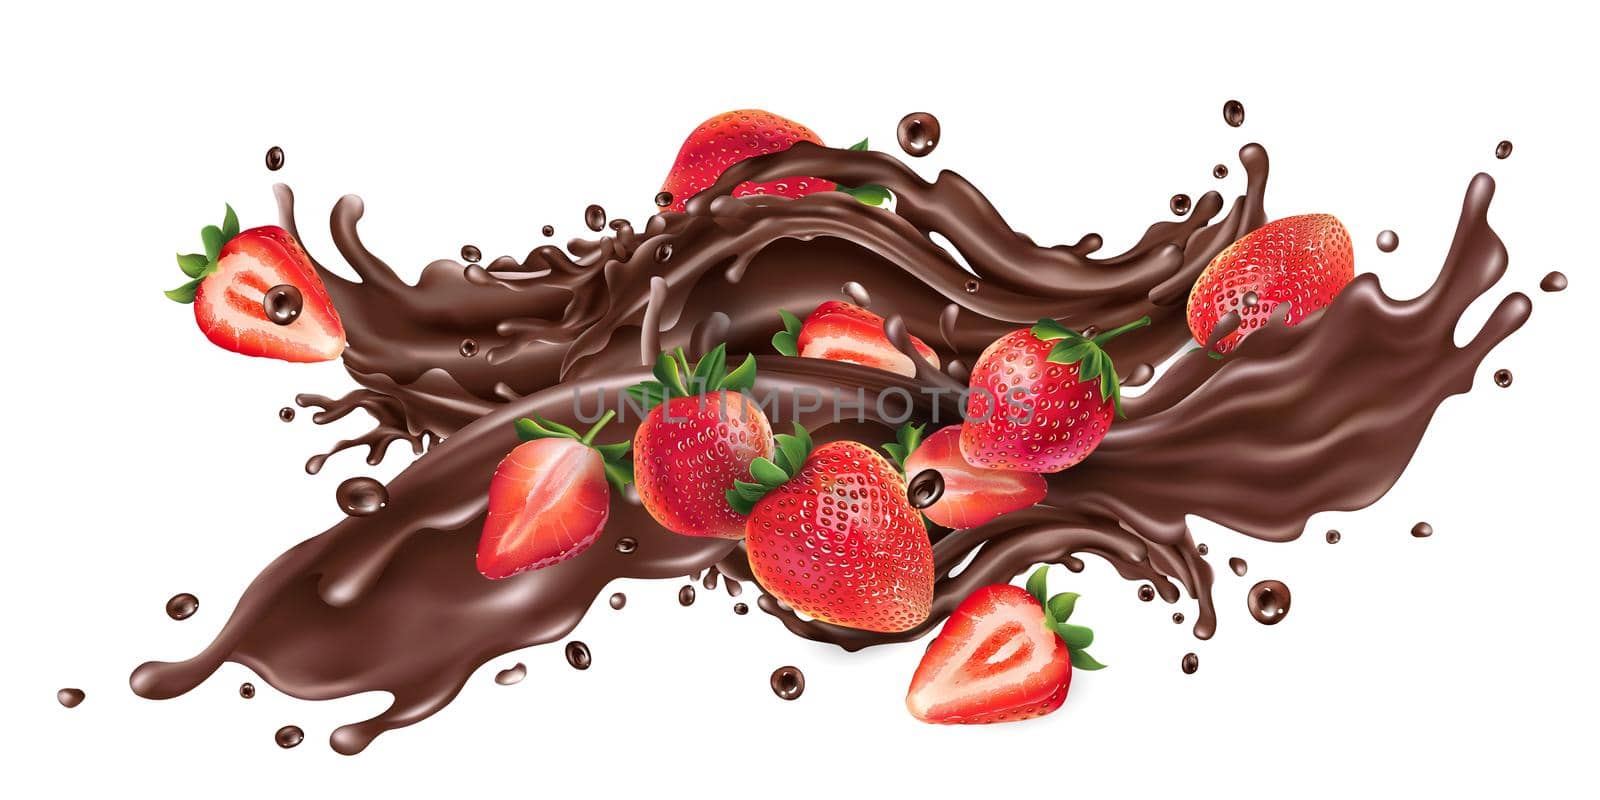 Splash of liquid chocolate and fresh strawberries. by ConceptCafe